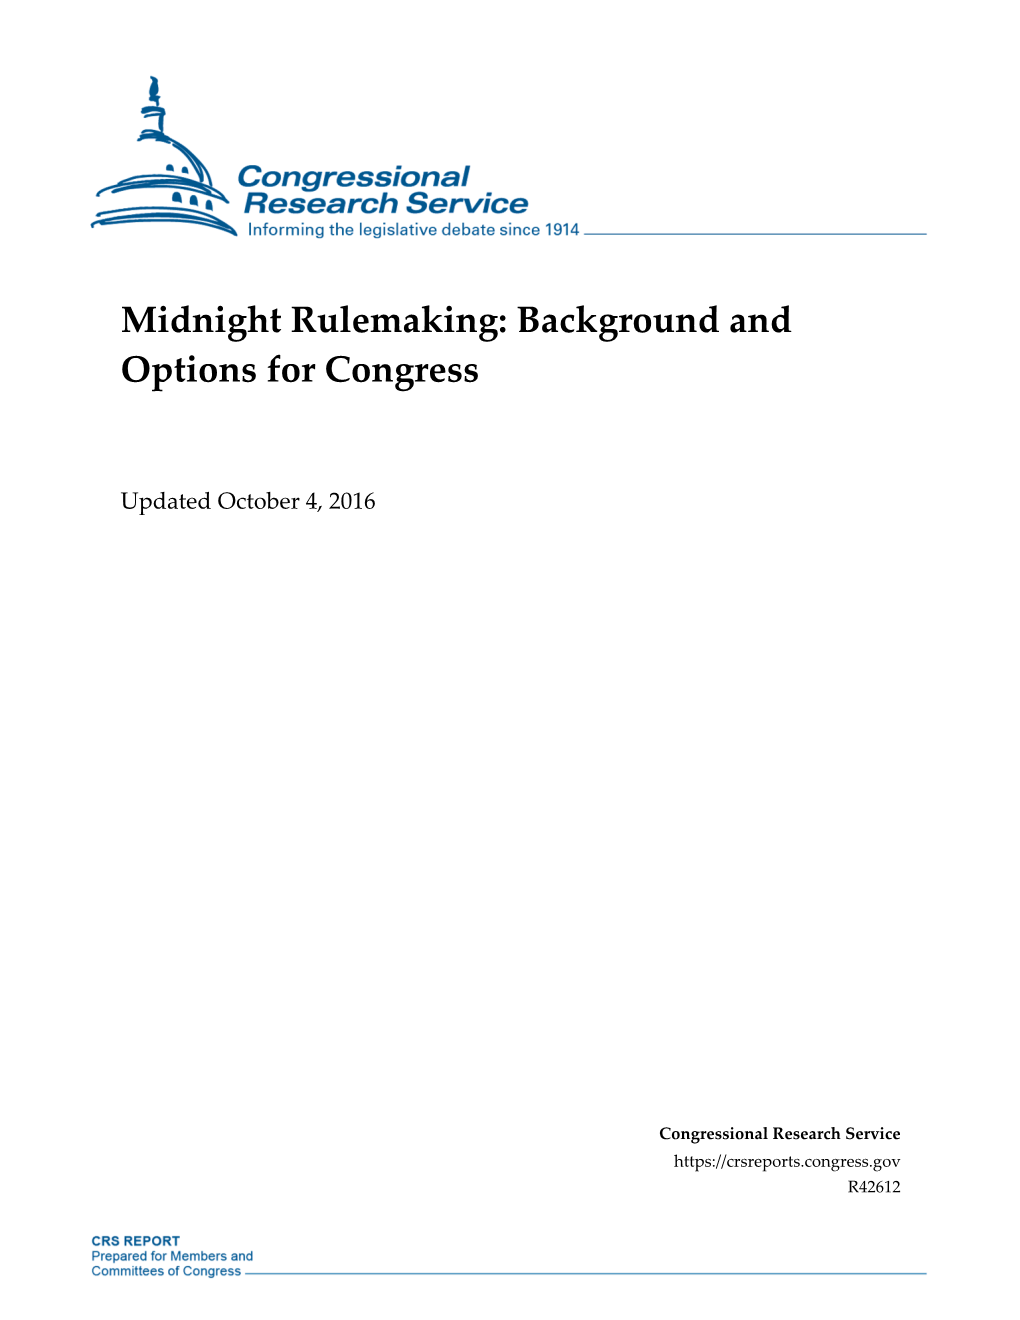 Midnight Rulemaking: Background and Options for Congress